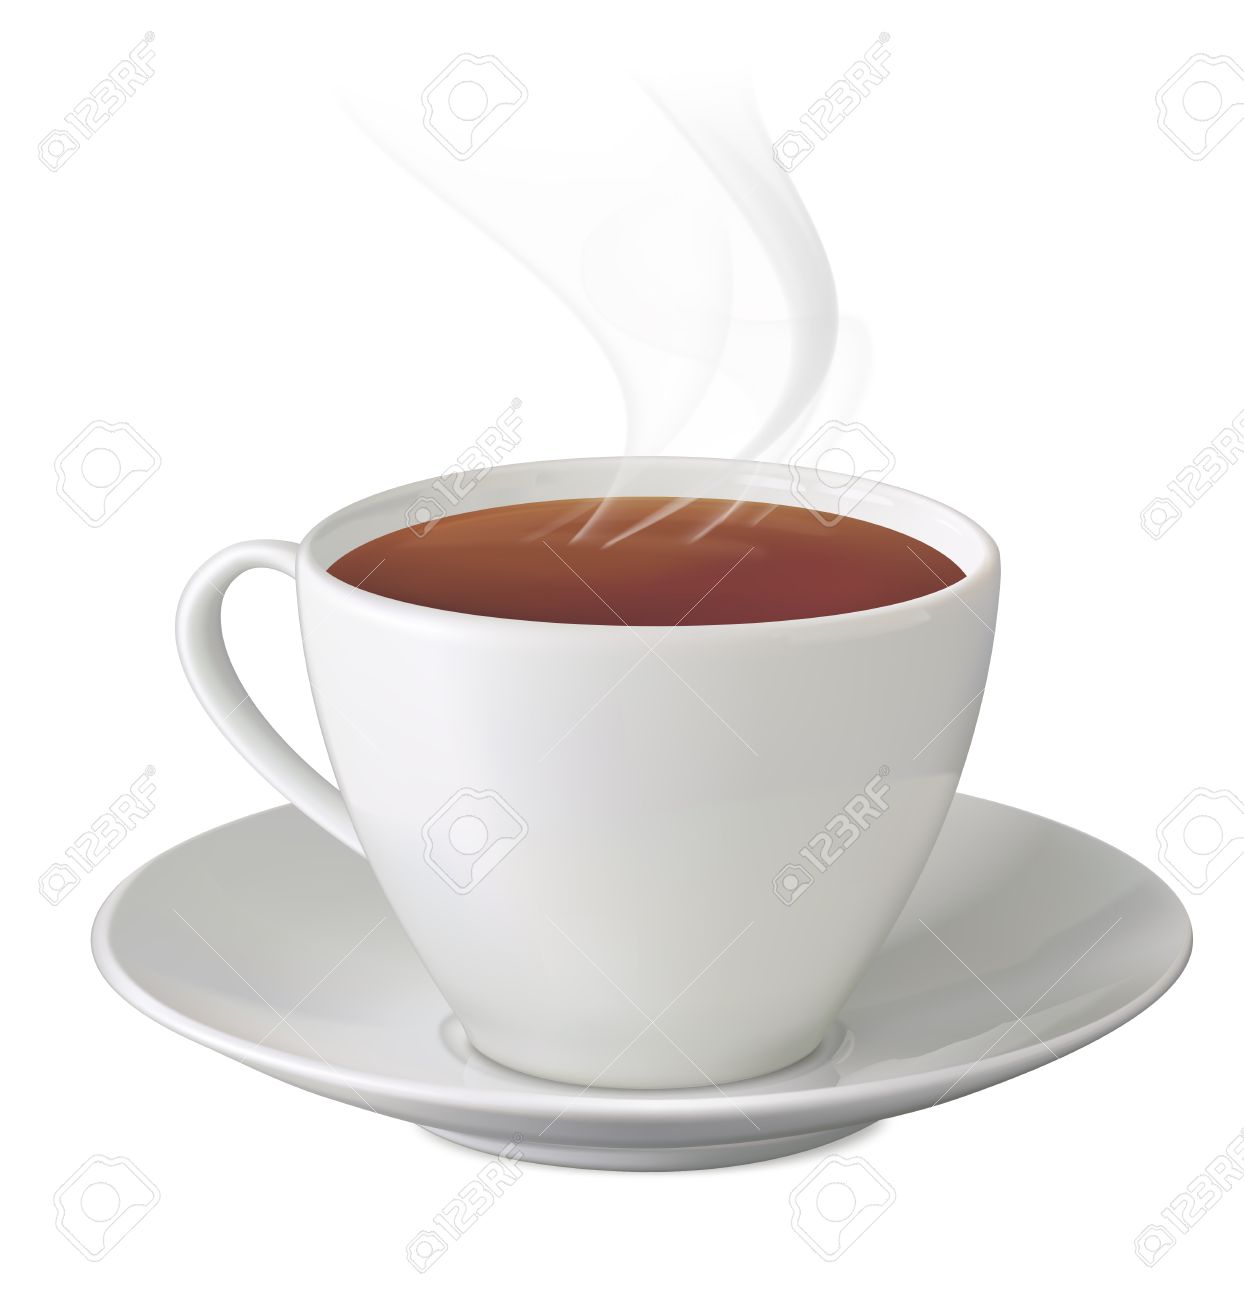 Cup Of Hot Tea With Steam And Saucer On White Background Vector